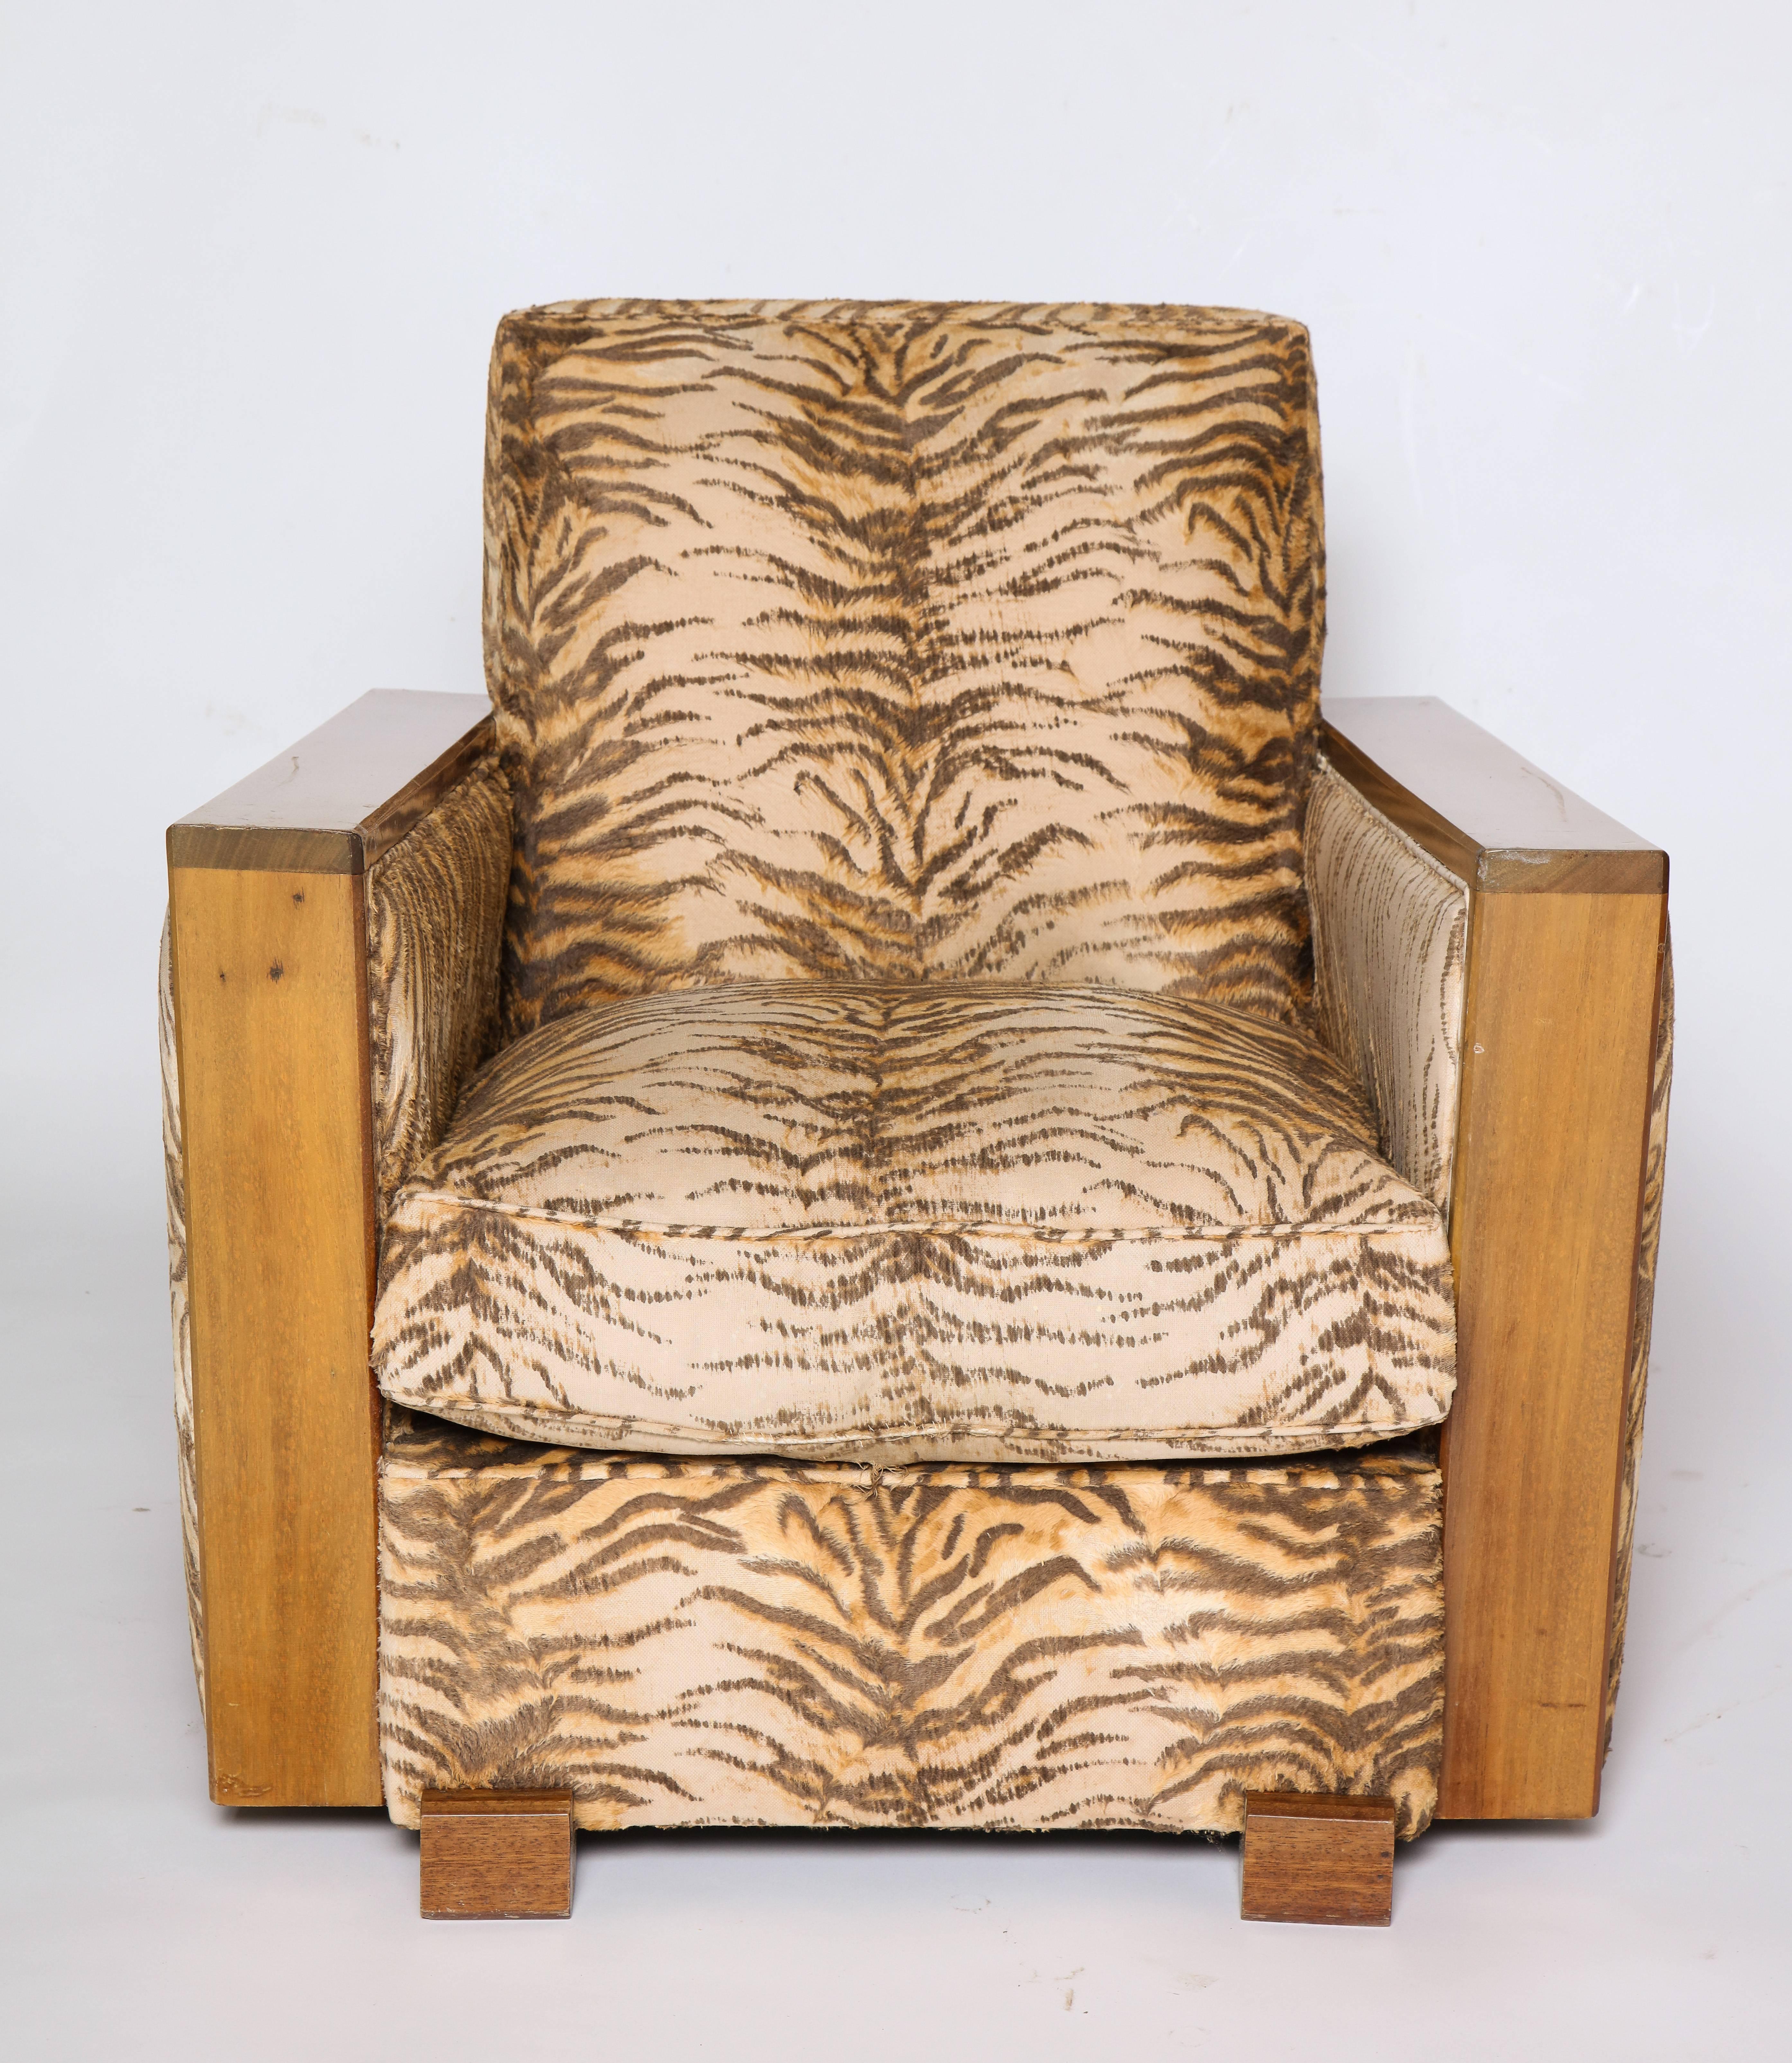 Art Deco Deco Chic Animal Print Pair of Chairs, France, 1940s